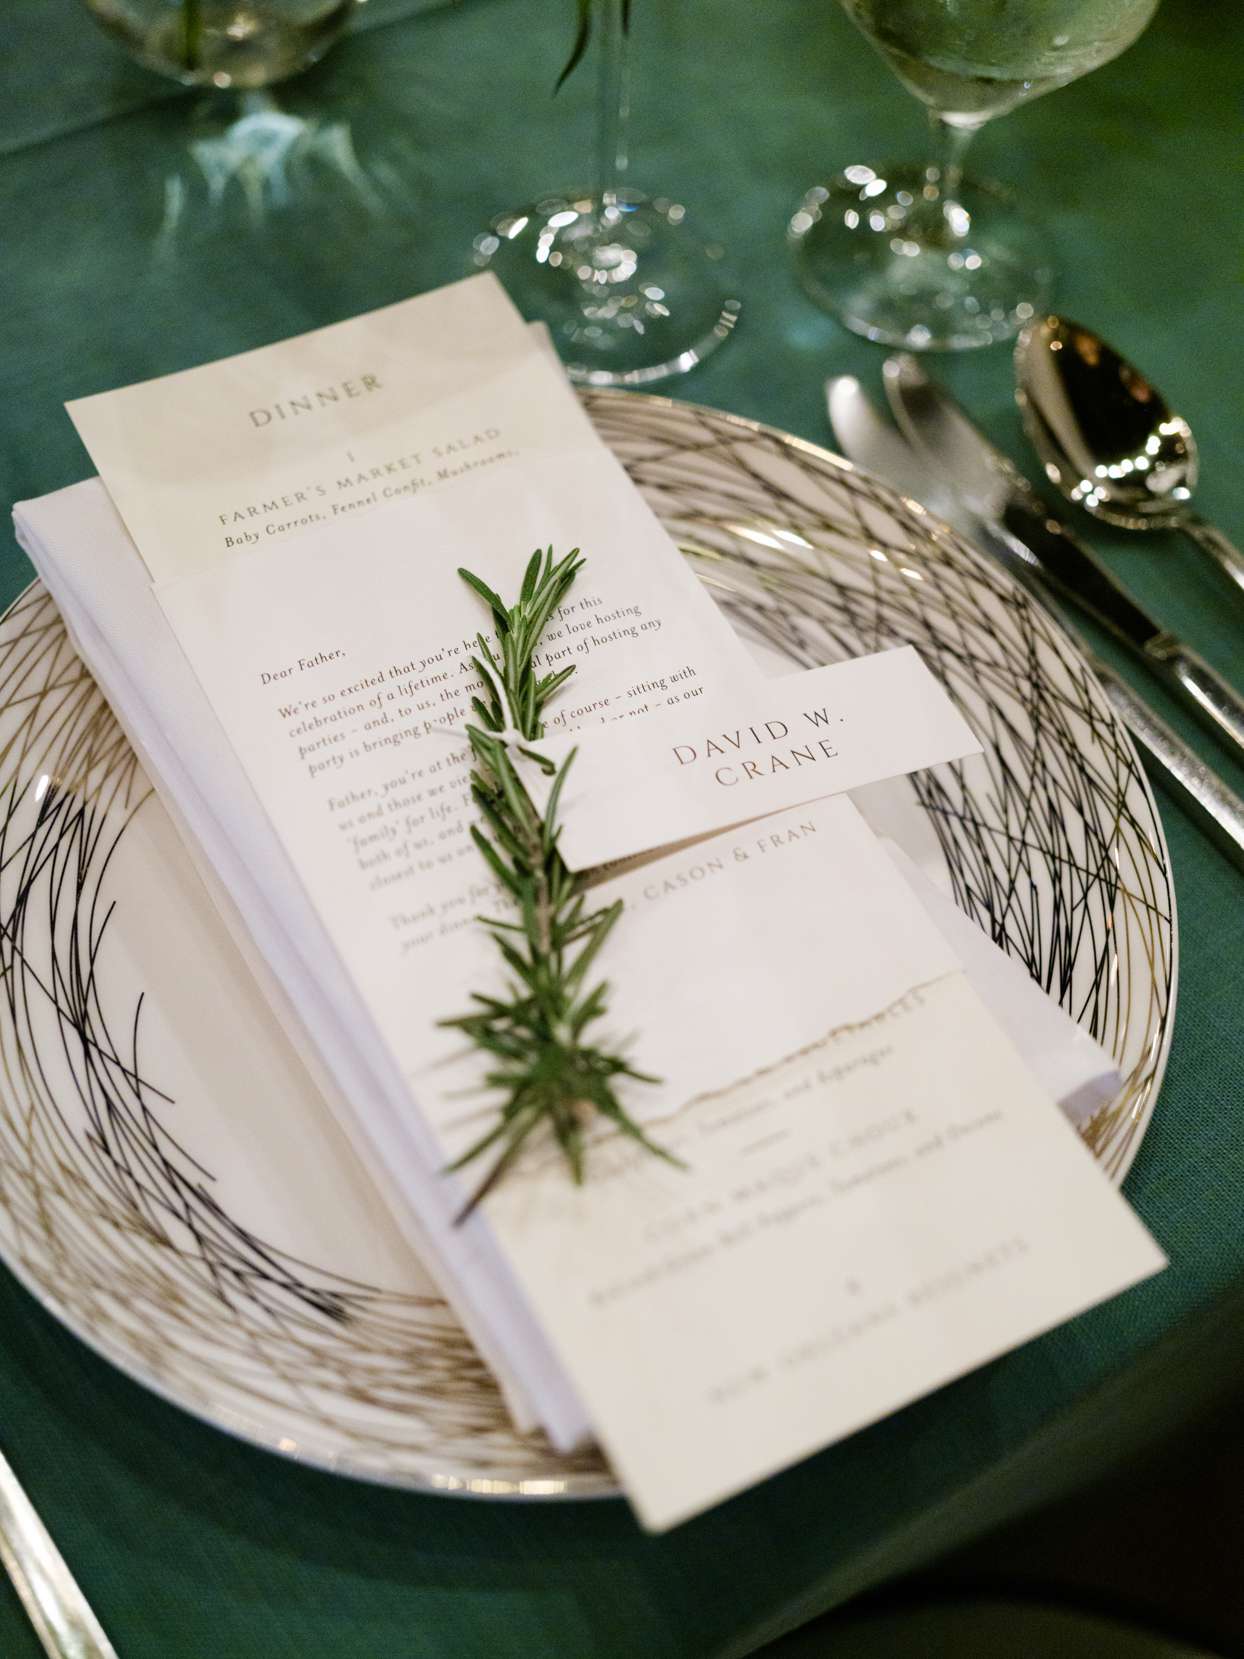 reception place setting with guests name and menu with rosemary sprig